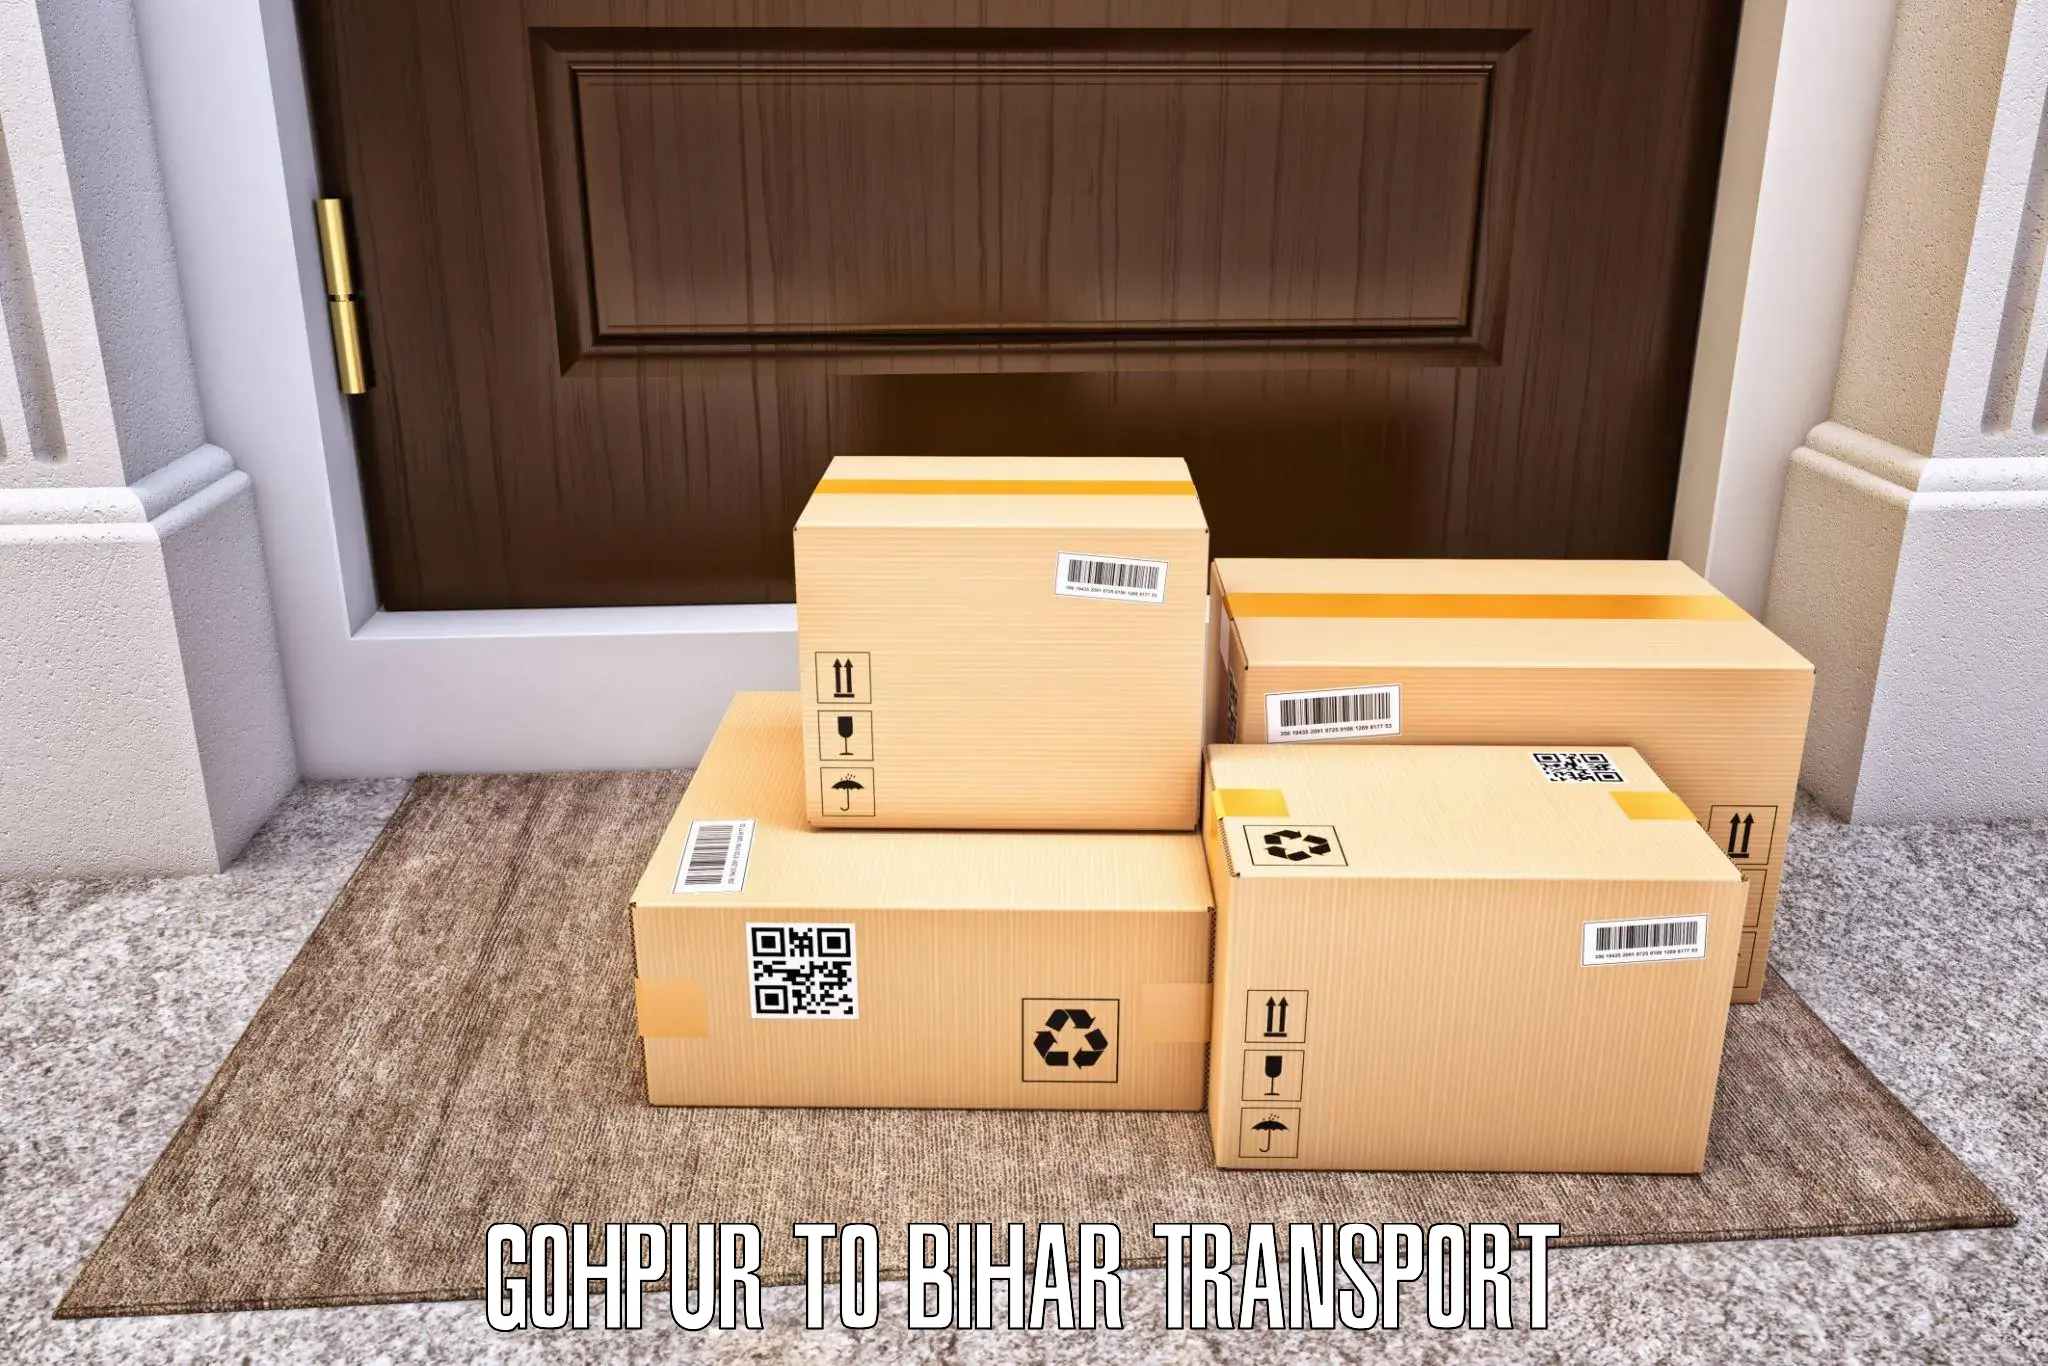 Part load transport service in India Gohpur to Sherghati